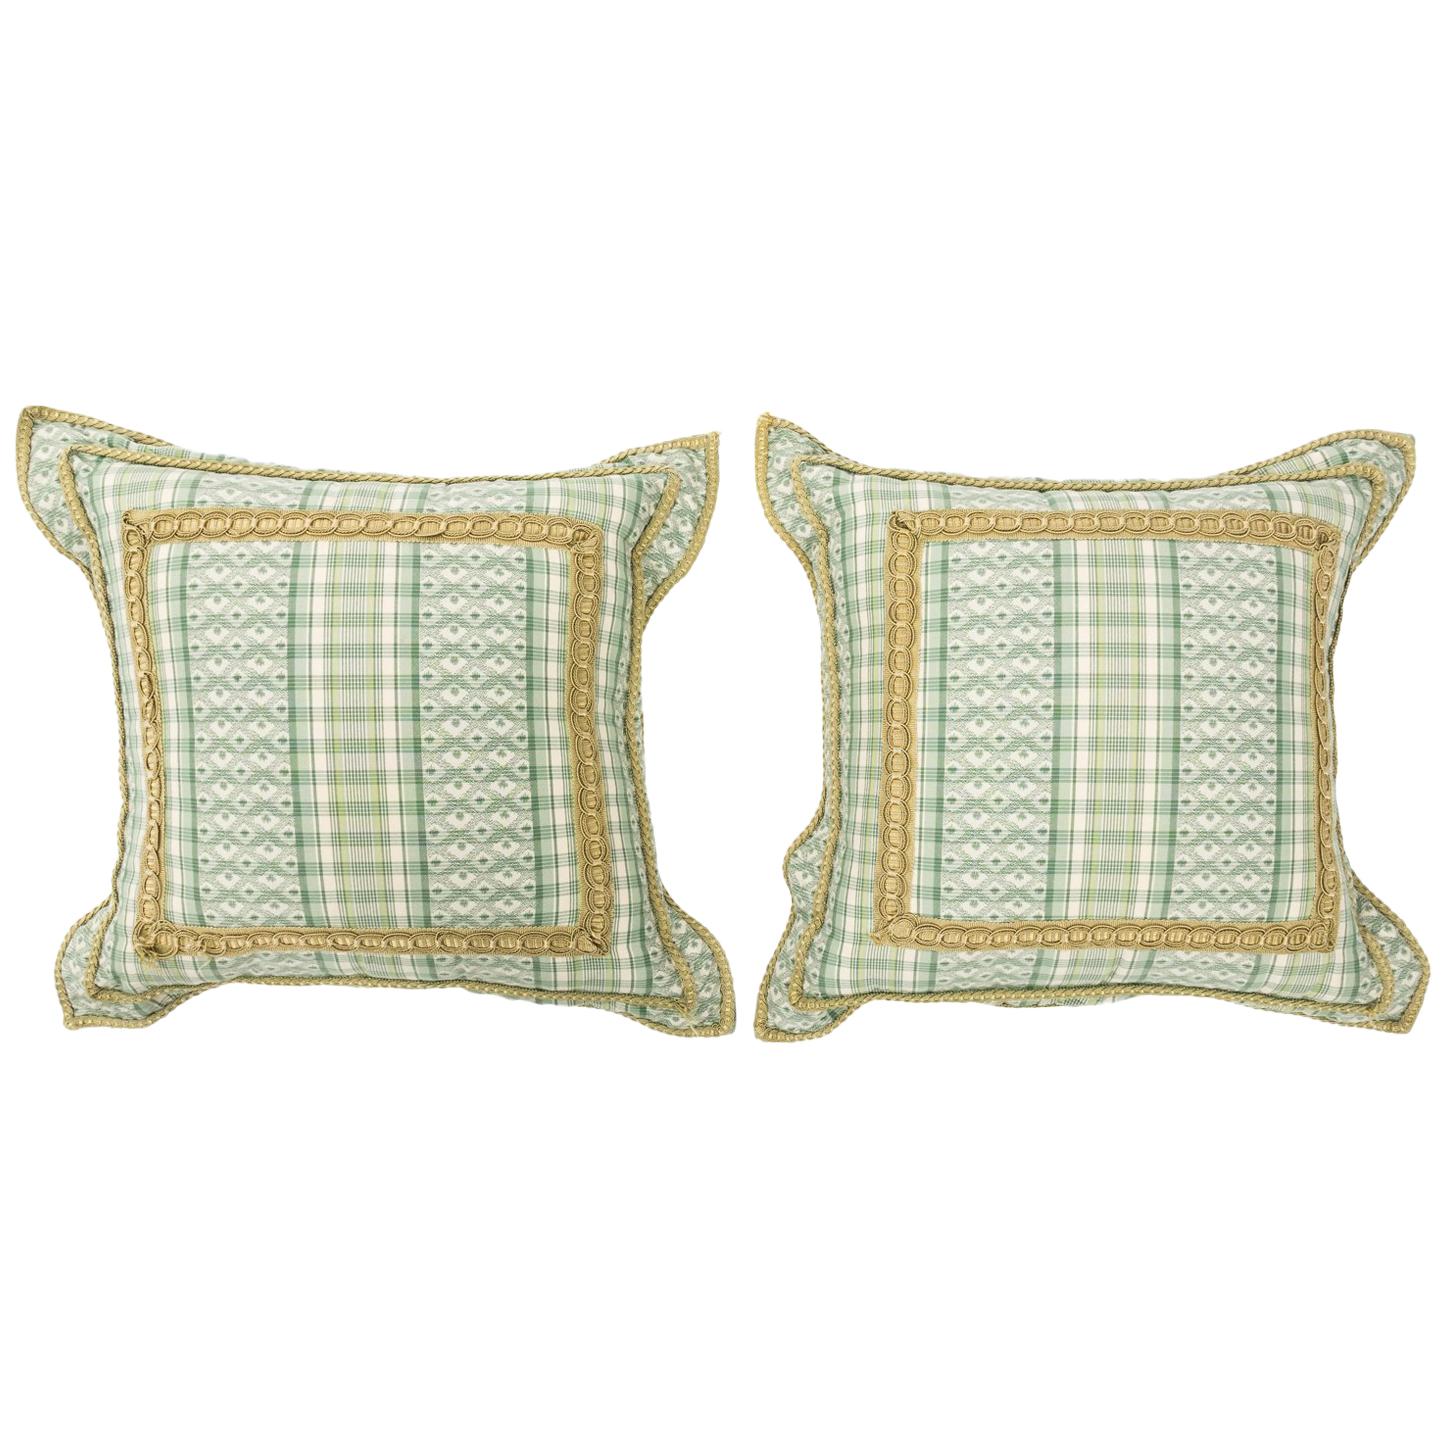 Decorative Green and White Pillows